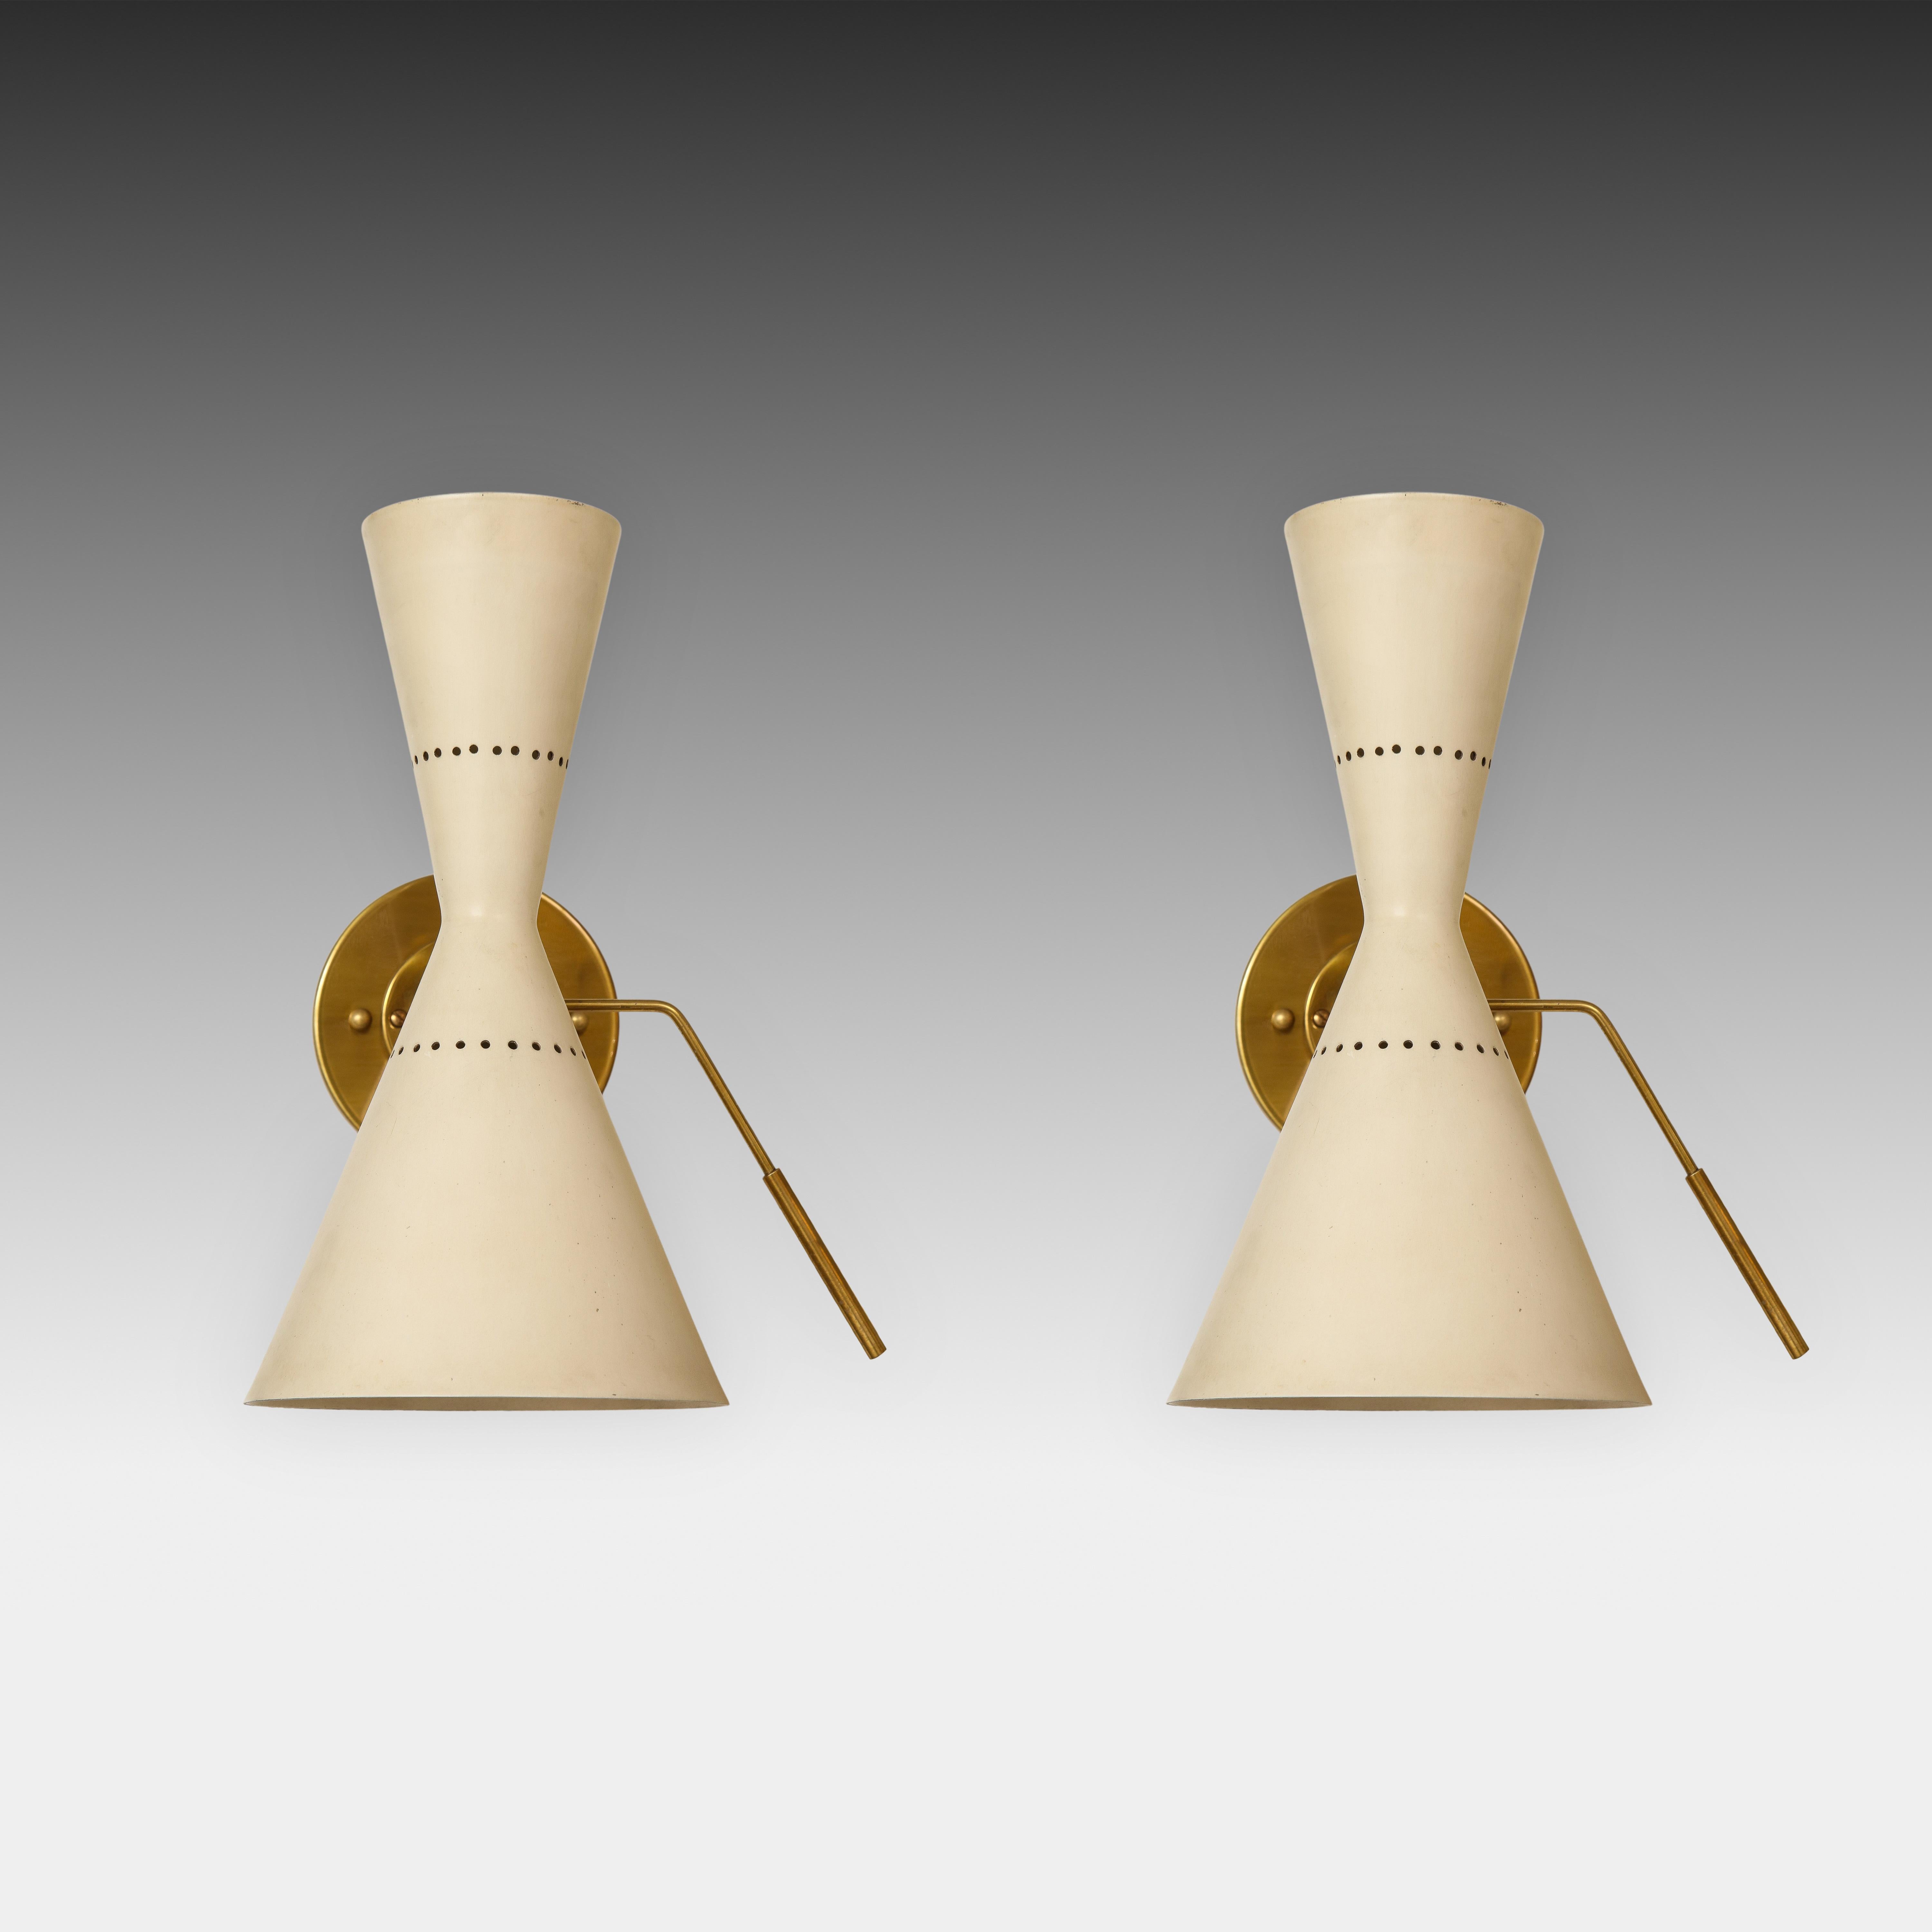 Stilnovo rare pair of adjustable articulating two-light cone-shaped sconces or wall lights with cream lacquered perforated metal shades which pivot with brass handles, and attached to original backplates. The cream shades each hold a socket on each